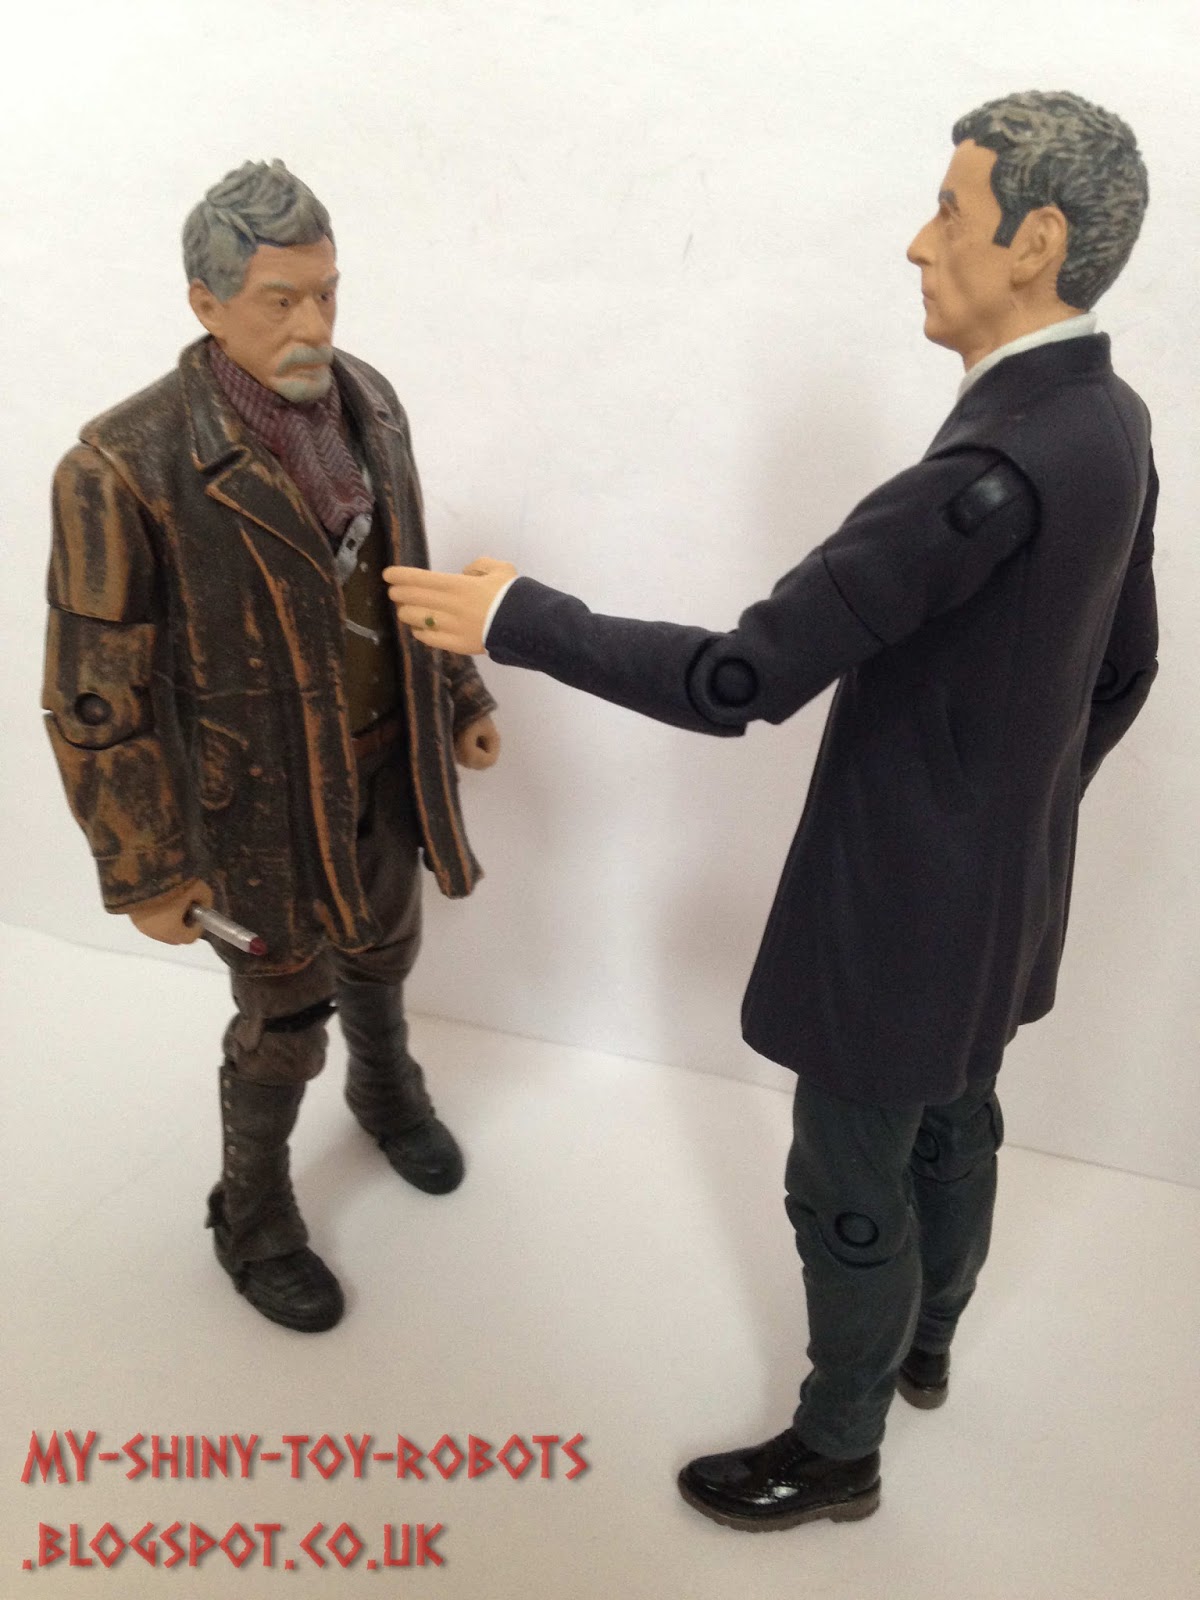 Doctor Who: Top 5 Twelfth Doctor Costumes (So Far) - Blogtor Who